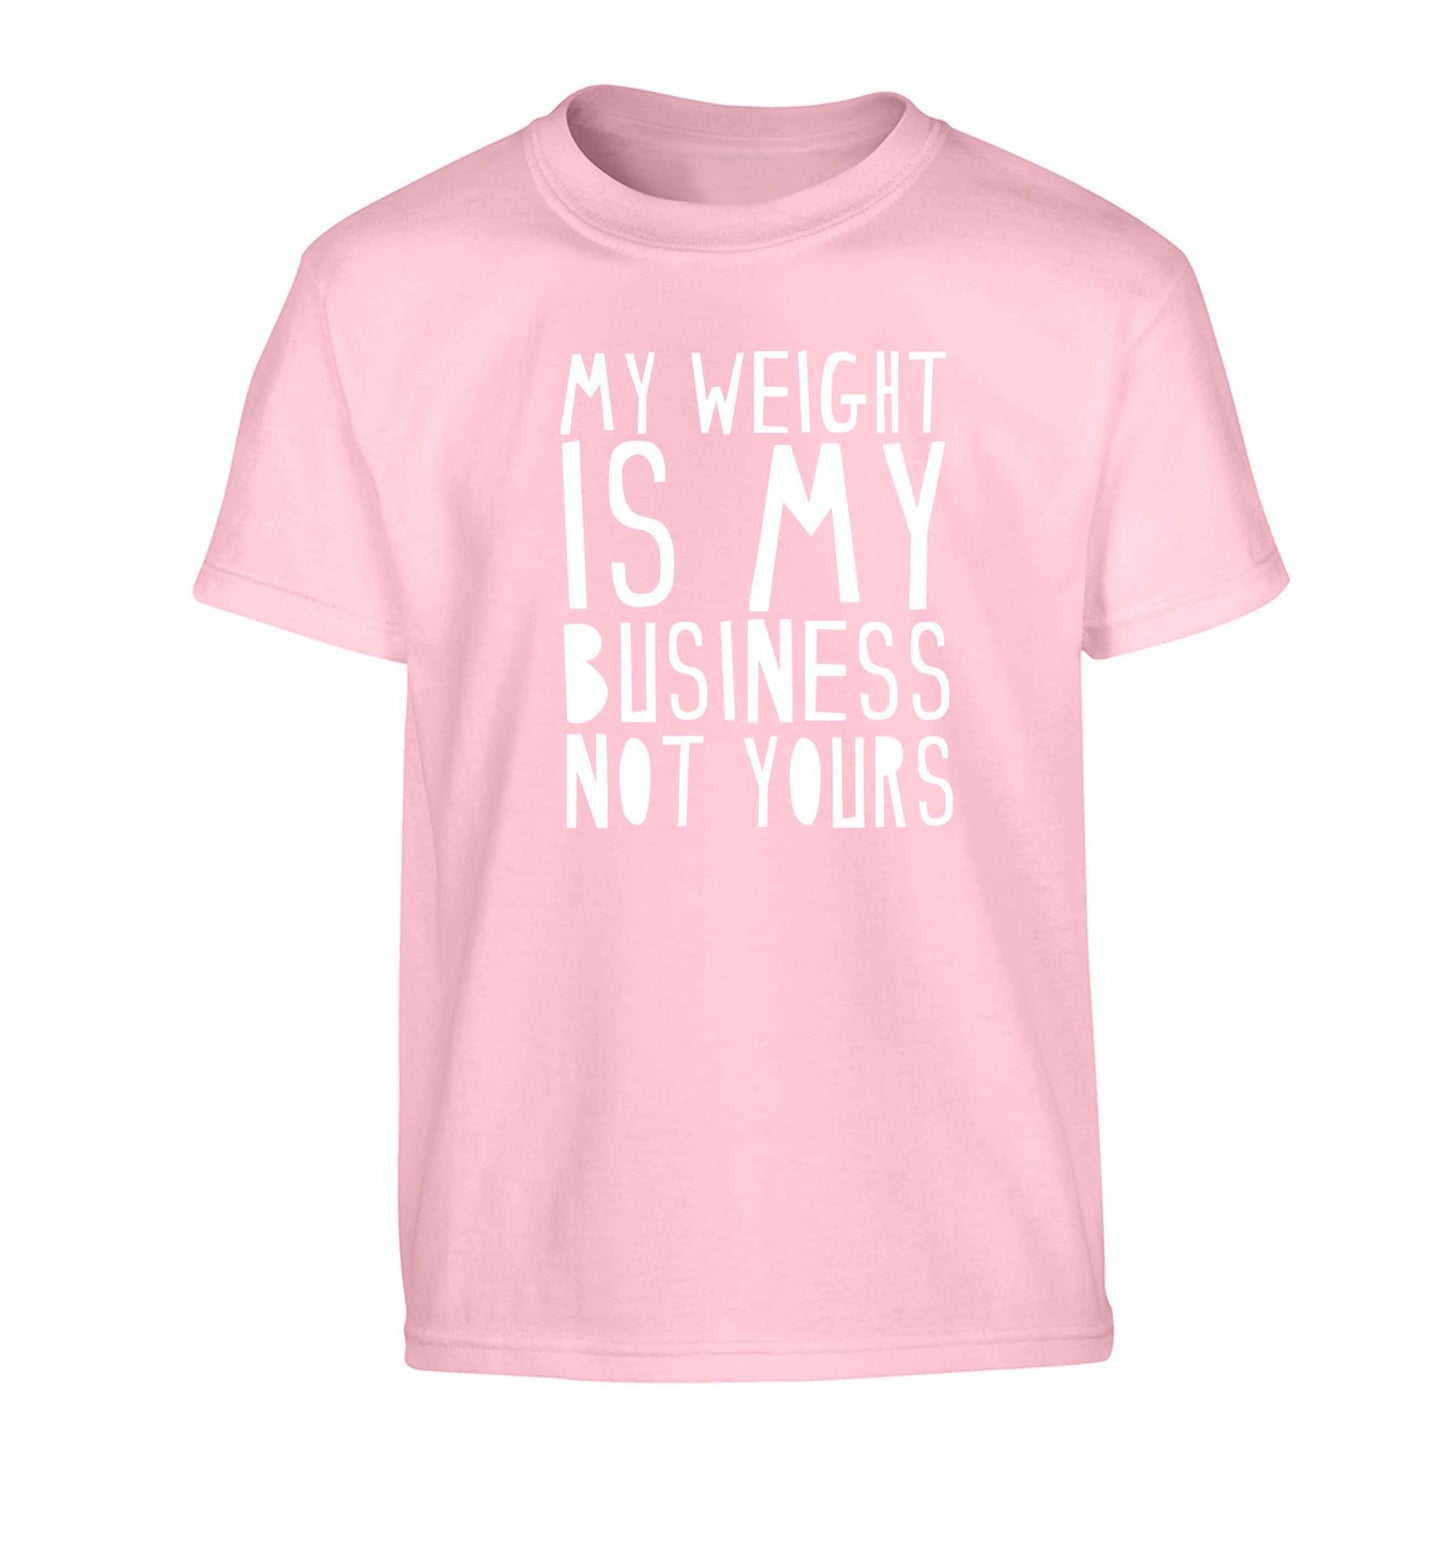 My weight is my business not yours Children's light pink Tshirt 12-13 Years